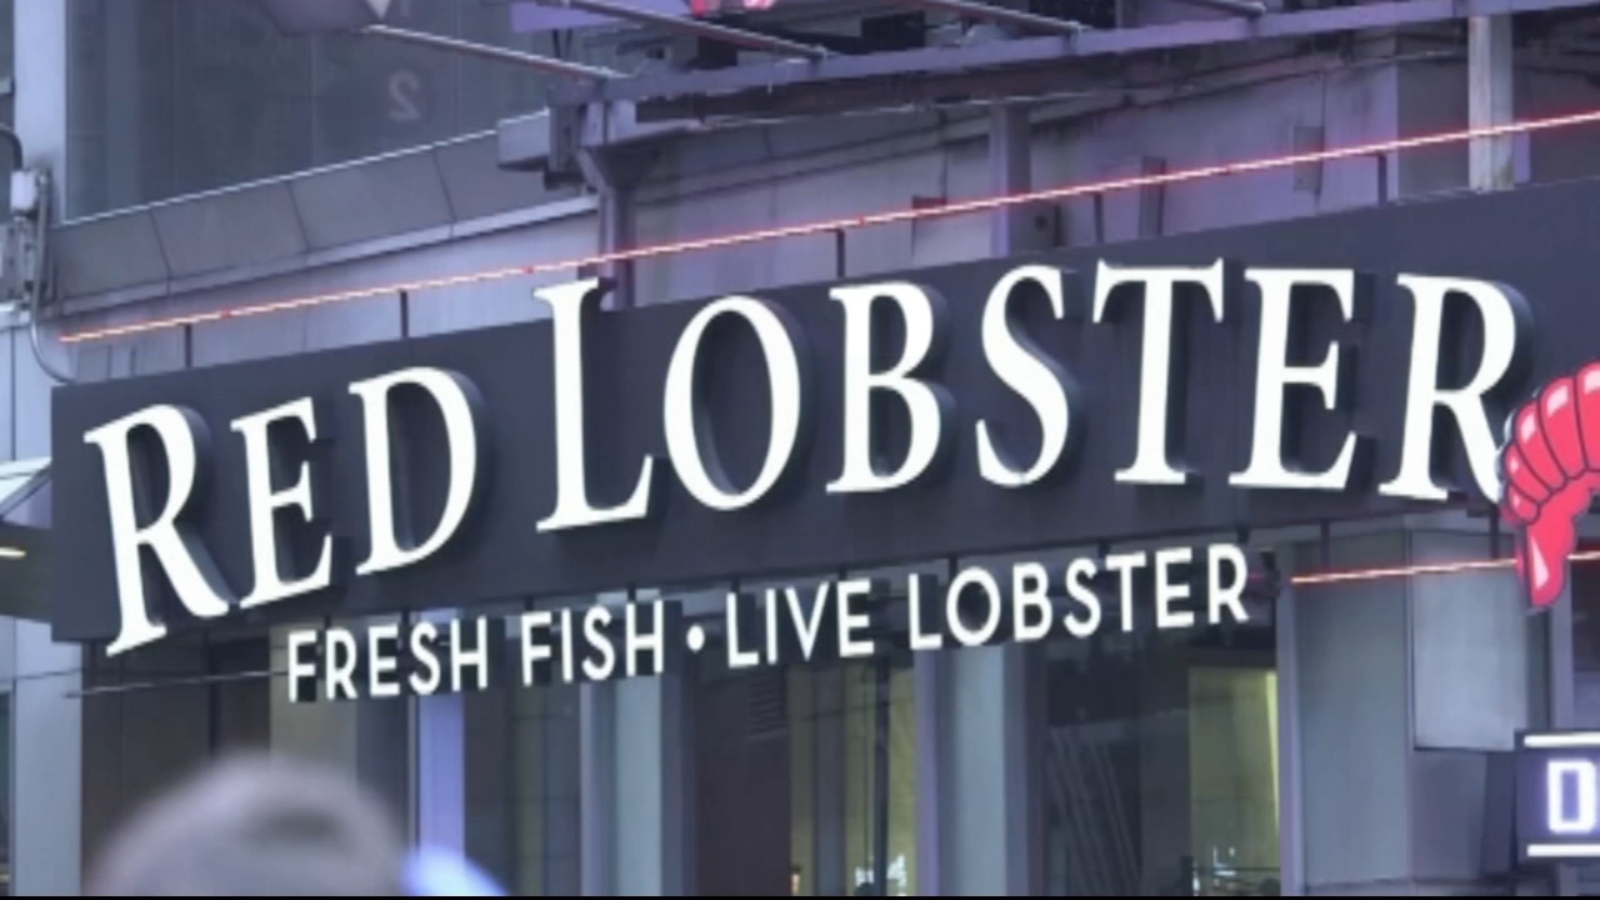 Why Red Lobster's CEO Quit Eating Lobster: Inside the Seafood Chain's Bankruptcy Story